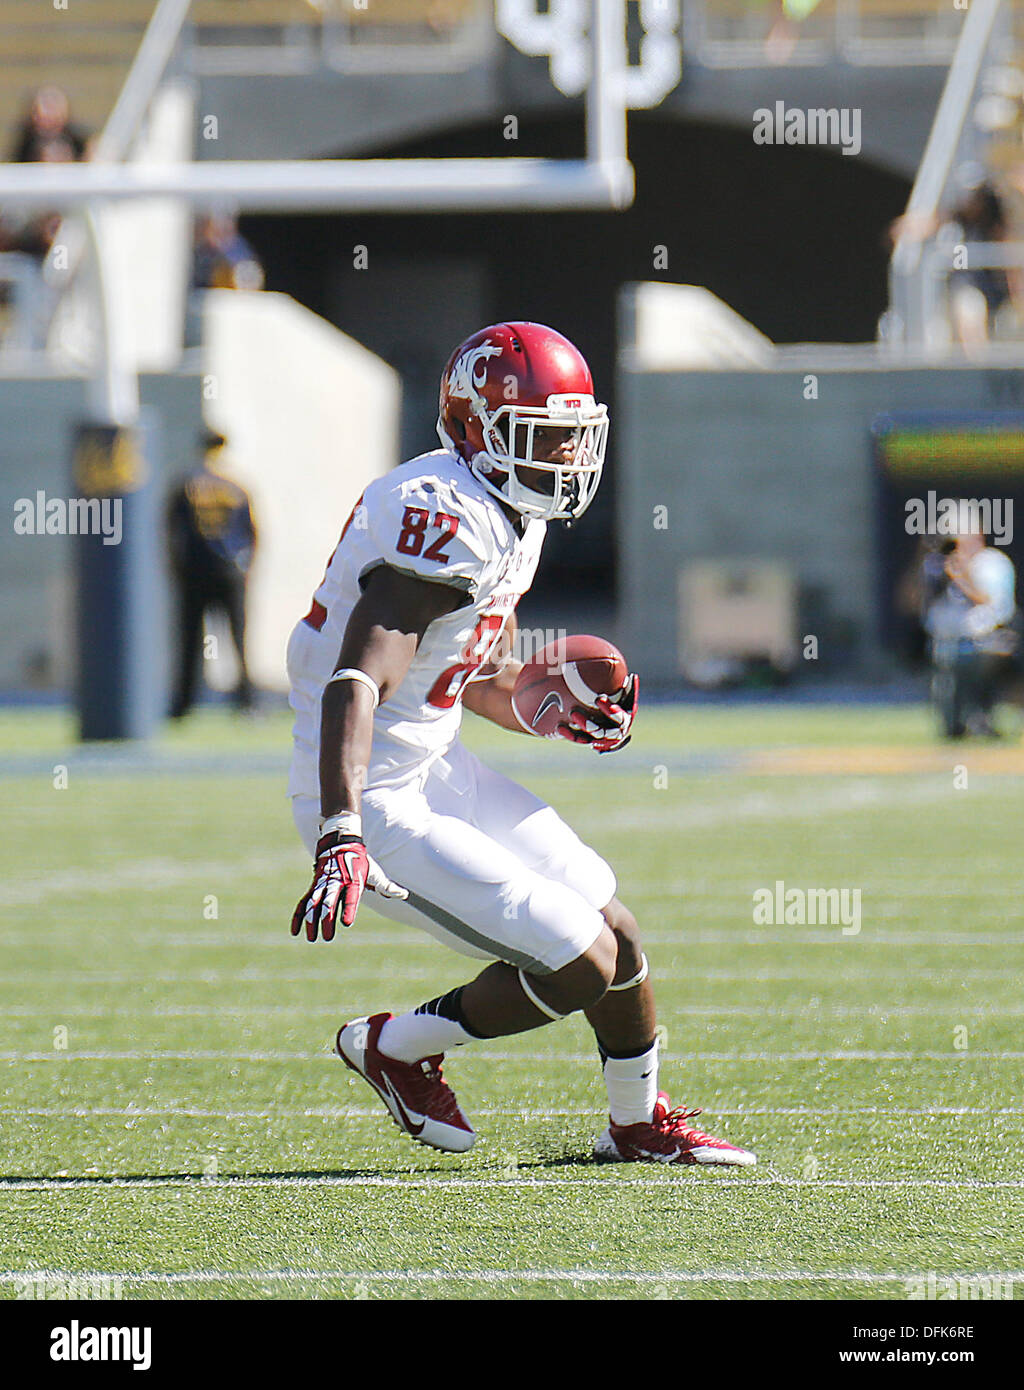 Berkeley, CA, USA. 5th Oct, 2013. OCT 05 2013 - Berkeley CA, U.S. - Washington State WR # 82 Bobby Ratliff catch a 5 yard pass for a first down turn into a 40 yard gain during NCAA Football game between Washington State Cougar and California Golden Bears 22-44 win at Memorial Stadium Berkeley Calif Credit:  csm/Alamy Live News Stock Photo